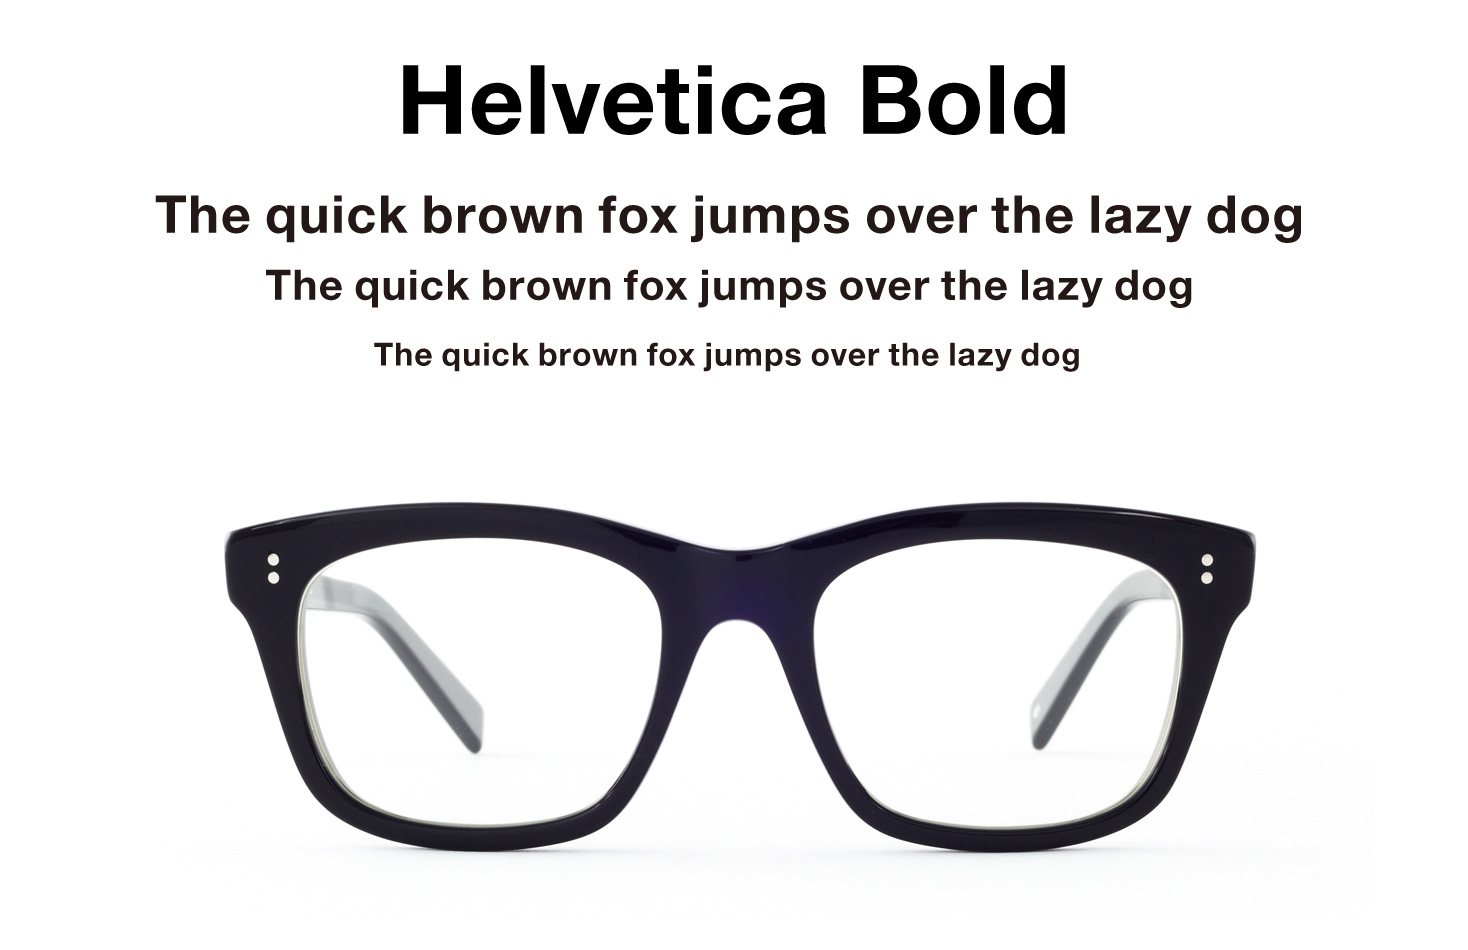 Helvetica for your nose. Eyeglasses inspired by Type.